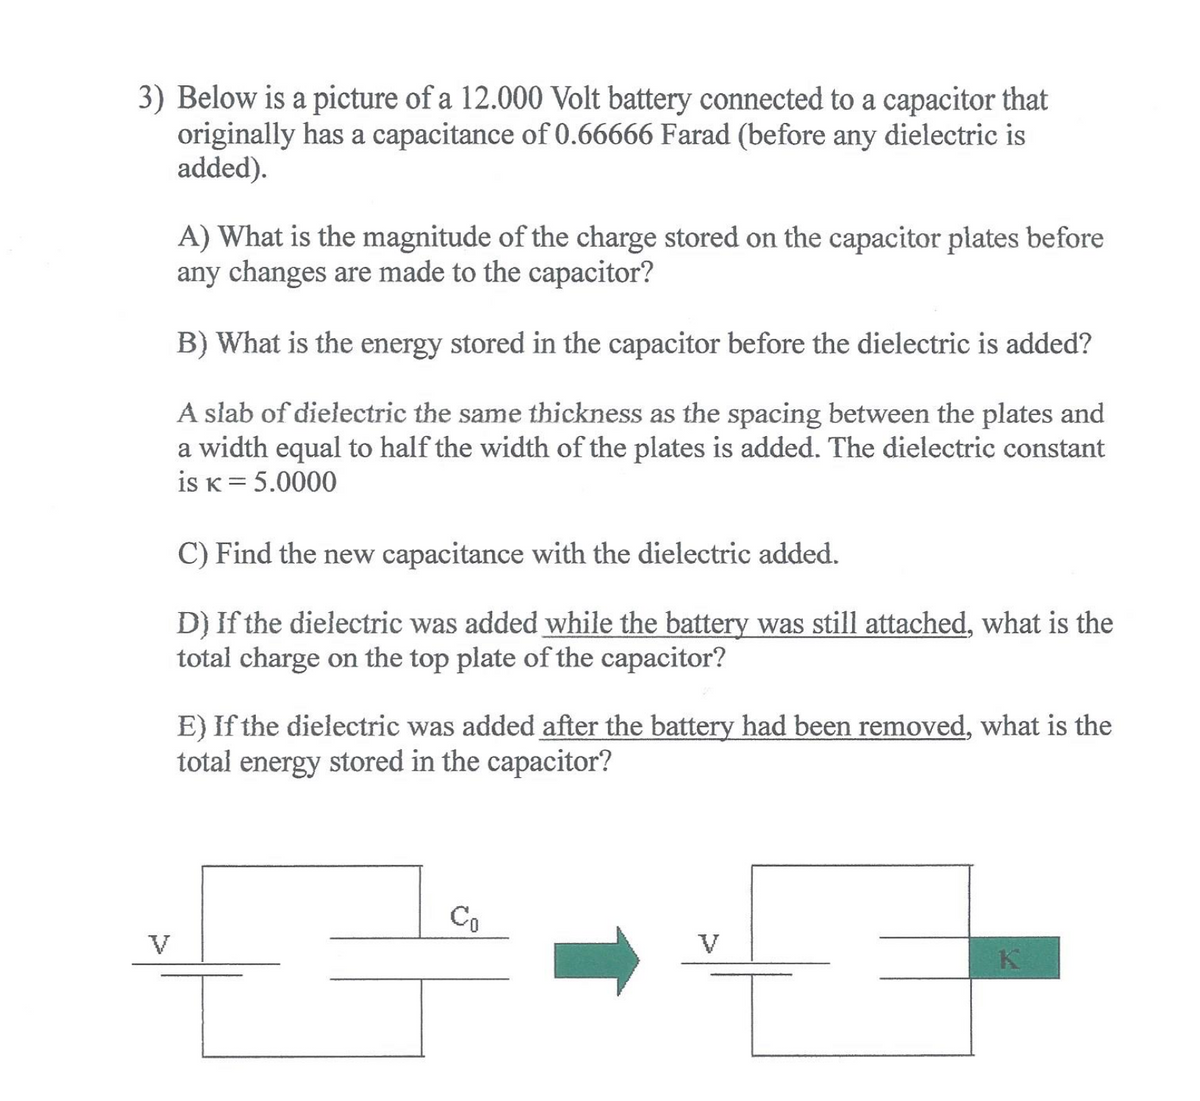 3) Below is a picture of a 12.000 Volt battery connected to a capacitor that
originally has a capacitance of 0.66666 Farad (before any dielectric is
added).
A) What is the magnitude of the charge stored on the capacitor plates before
any changes are made to the capacitor?
B) What is the energy stored in the capacitor before the dielectric is added?
A slab of dielectric the same thickness as the spacing between the plates and
a width equal to half the width of the plates is added. The dielectric constant
is K= 5.0000
C) Find the new capacitance with the dielectric added.
D) If the dielectric was added while the battery was still attached, what is the
total charge on the top plate of the capacitor?
E) If the dielectric was added after the battery had been removed, what is the
total energy stored in the capacitor?
Co
V
V
K
